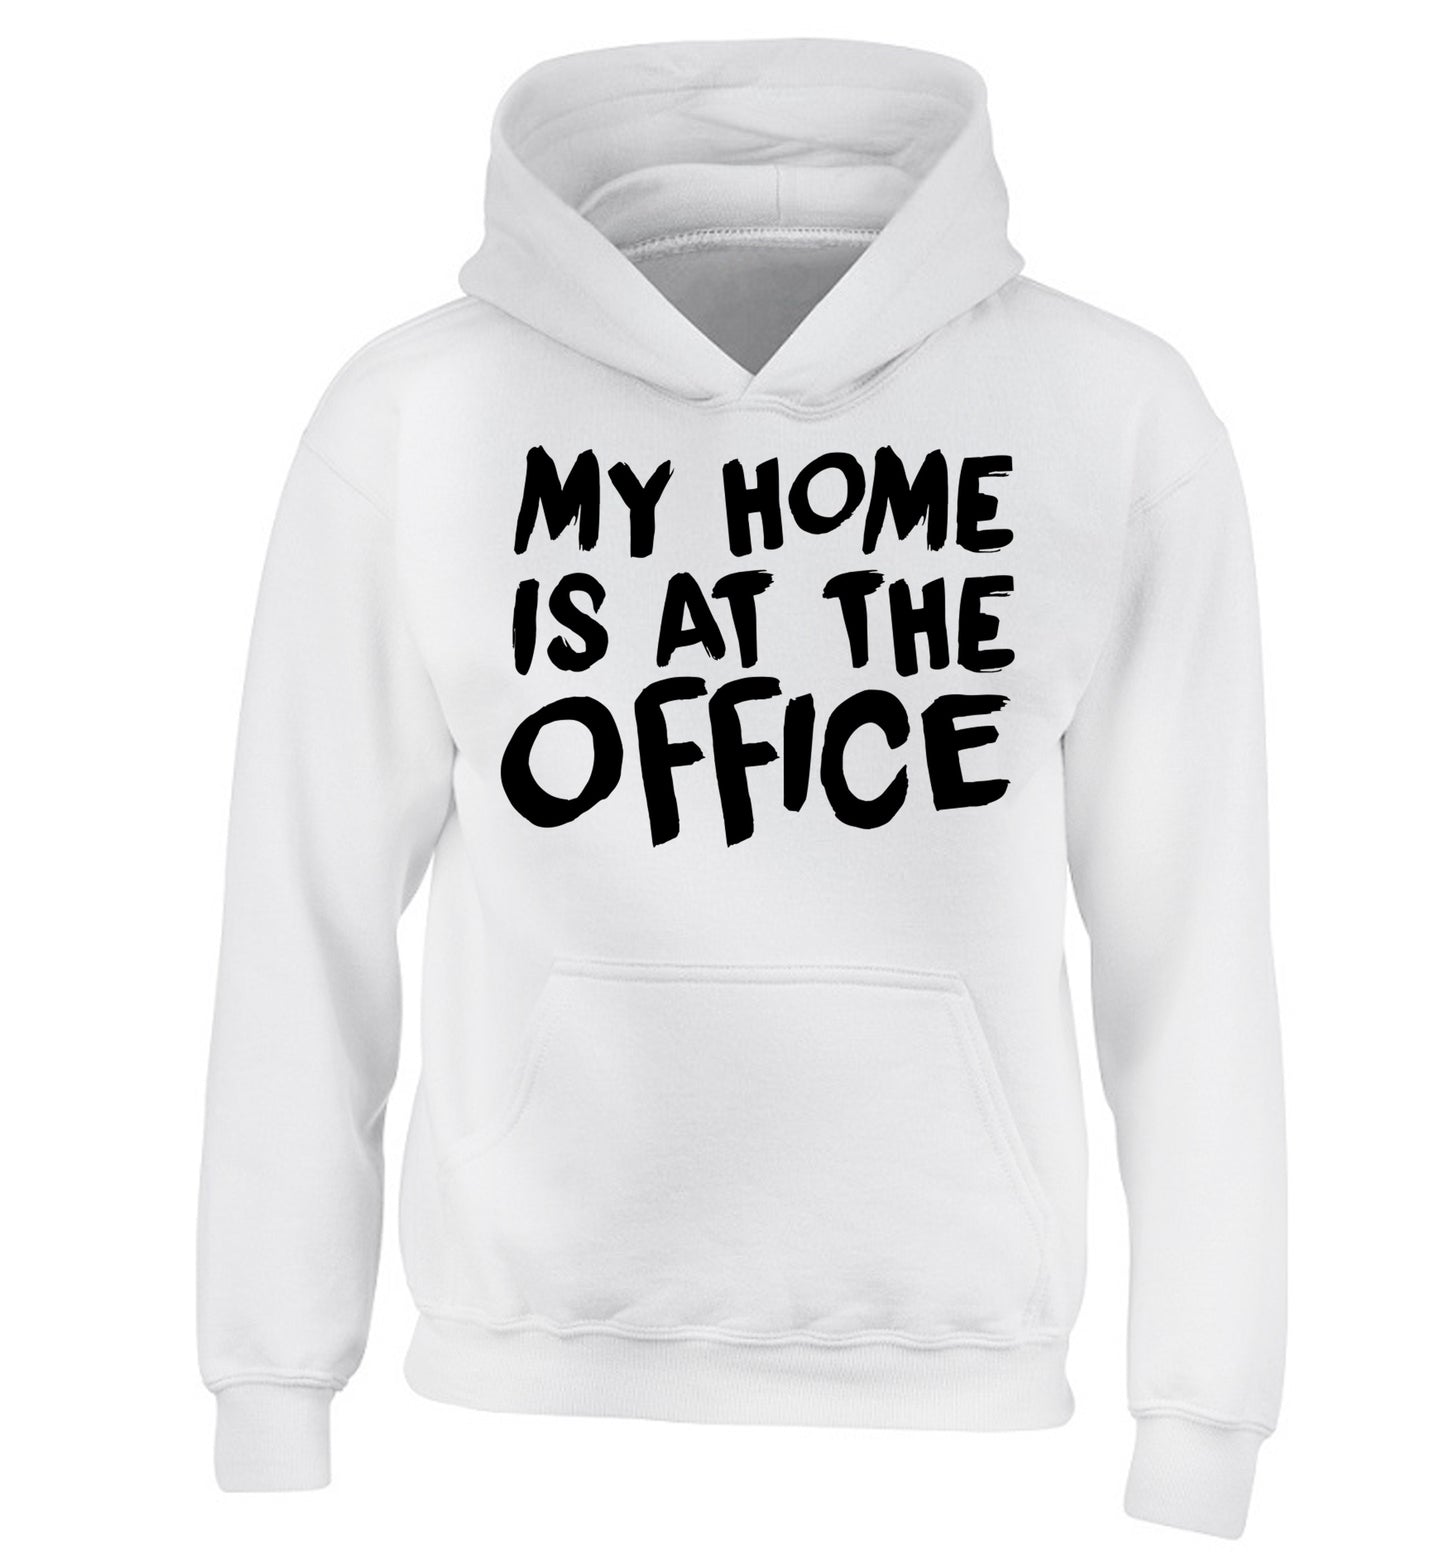 My home is at the office children's white hoodie 12-14 Years